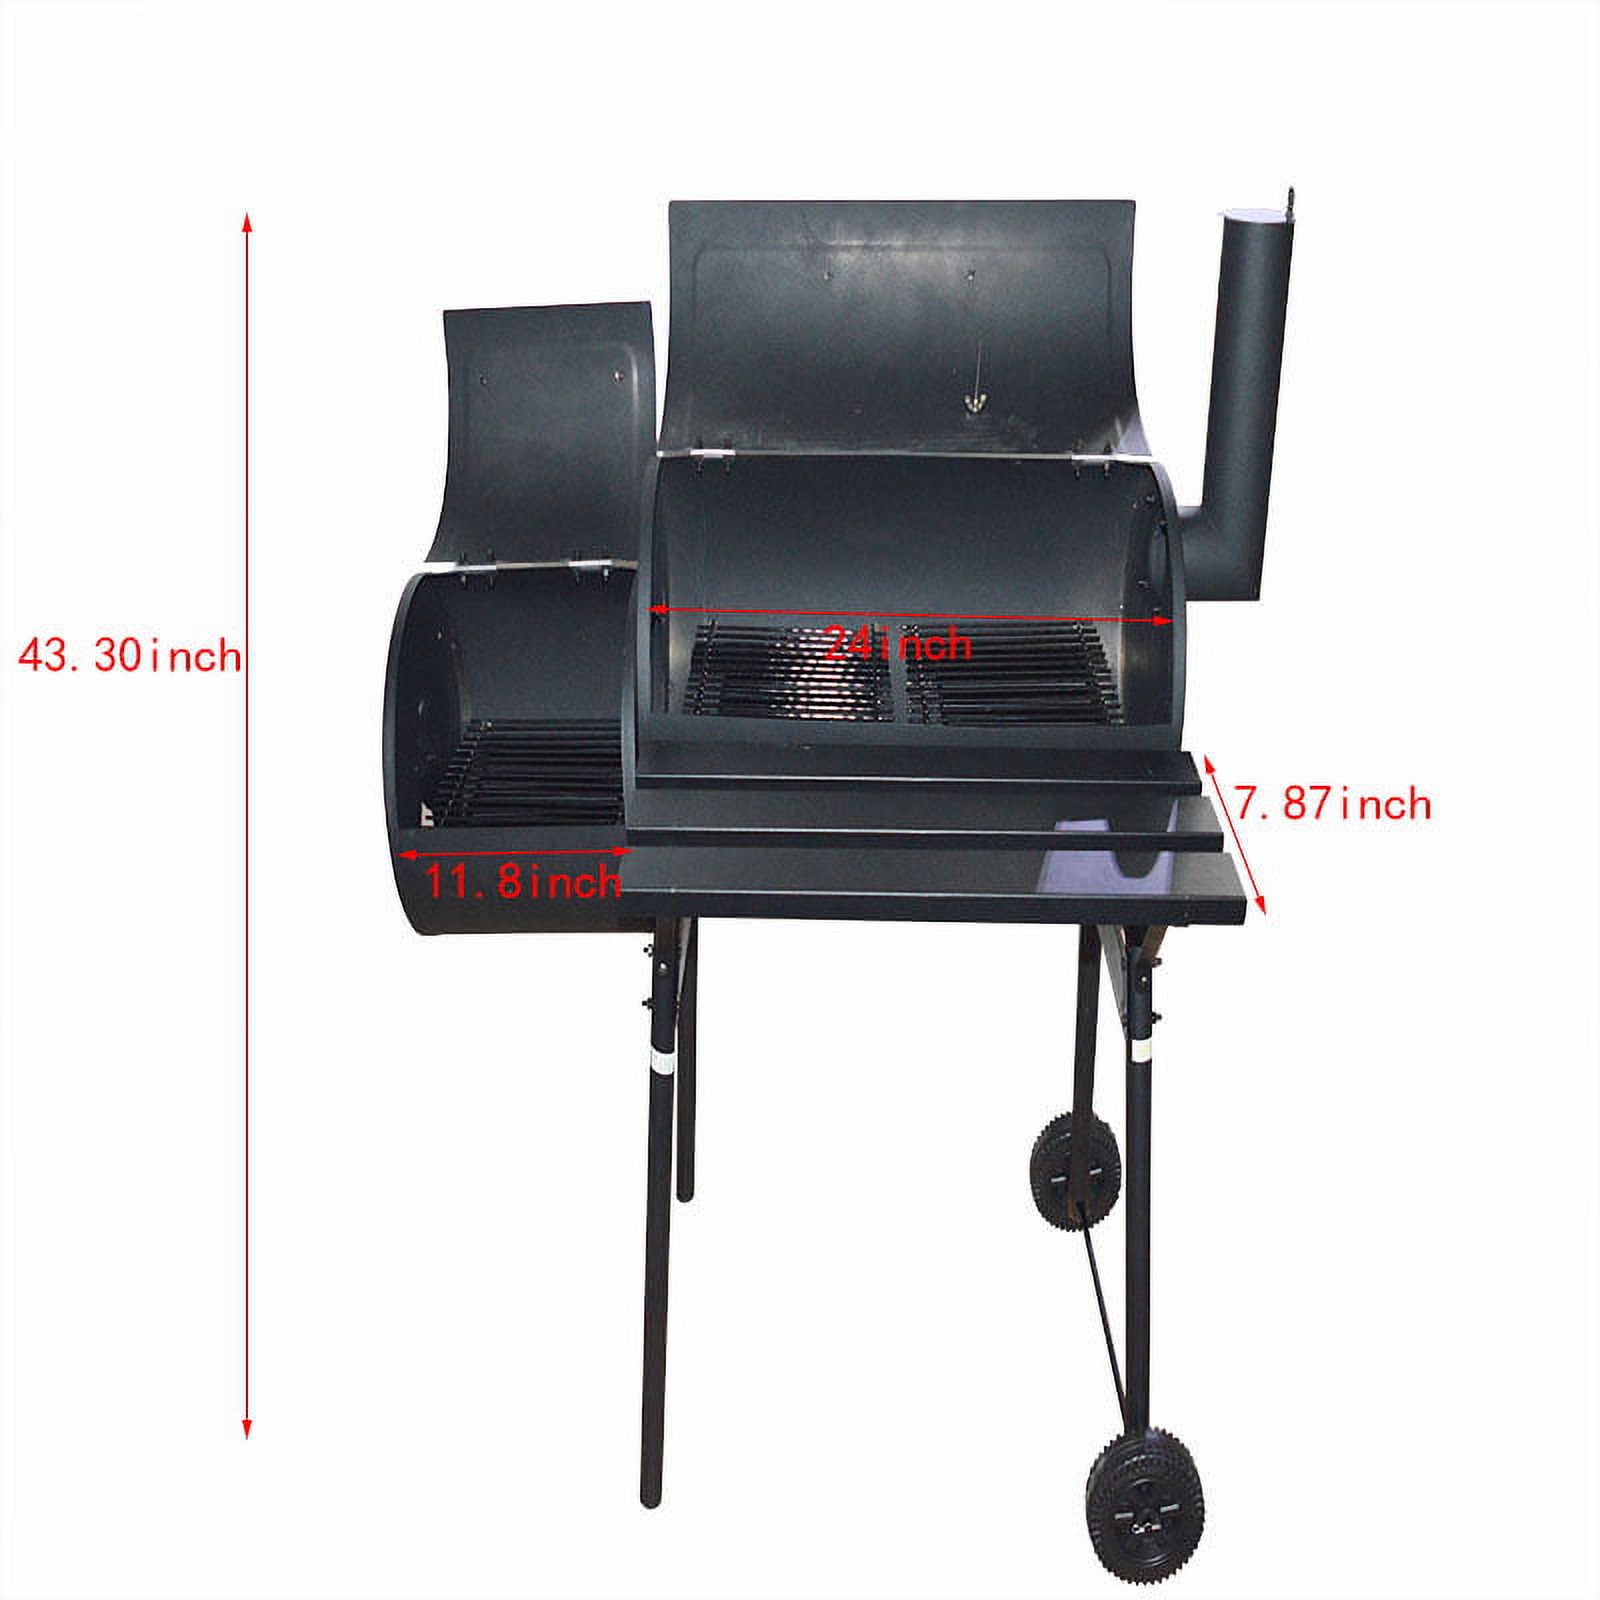 INTBUYING Outdoor BBQ Grill Camping Garden Charcoal Barbecue Stove Grills - image 2 of 8